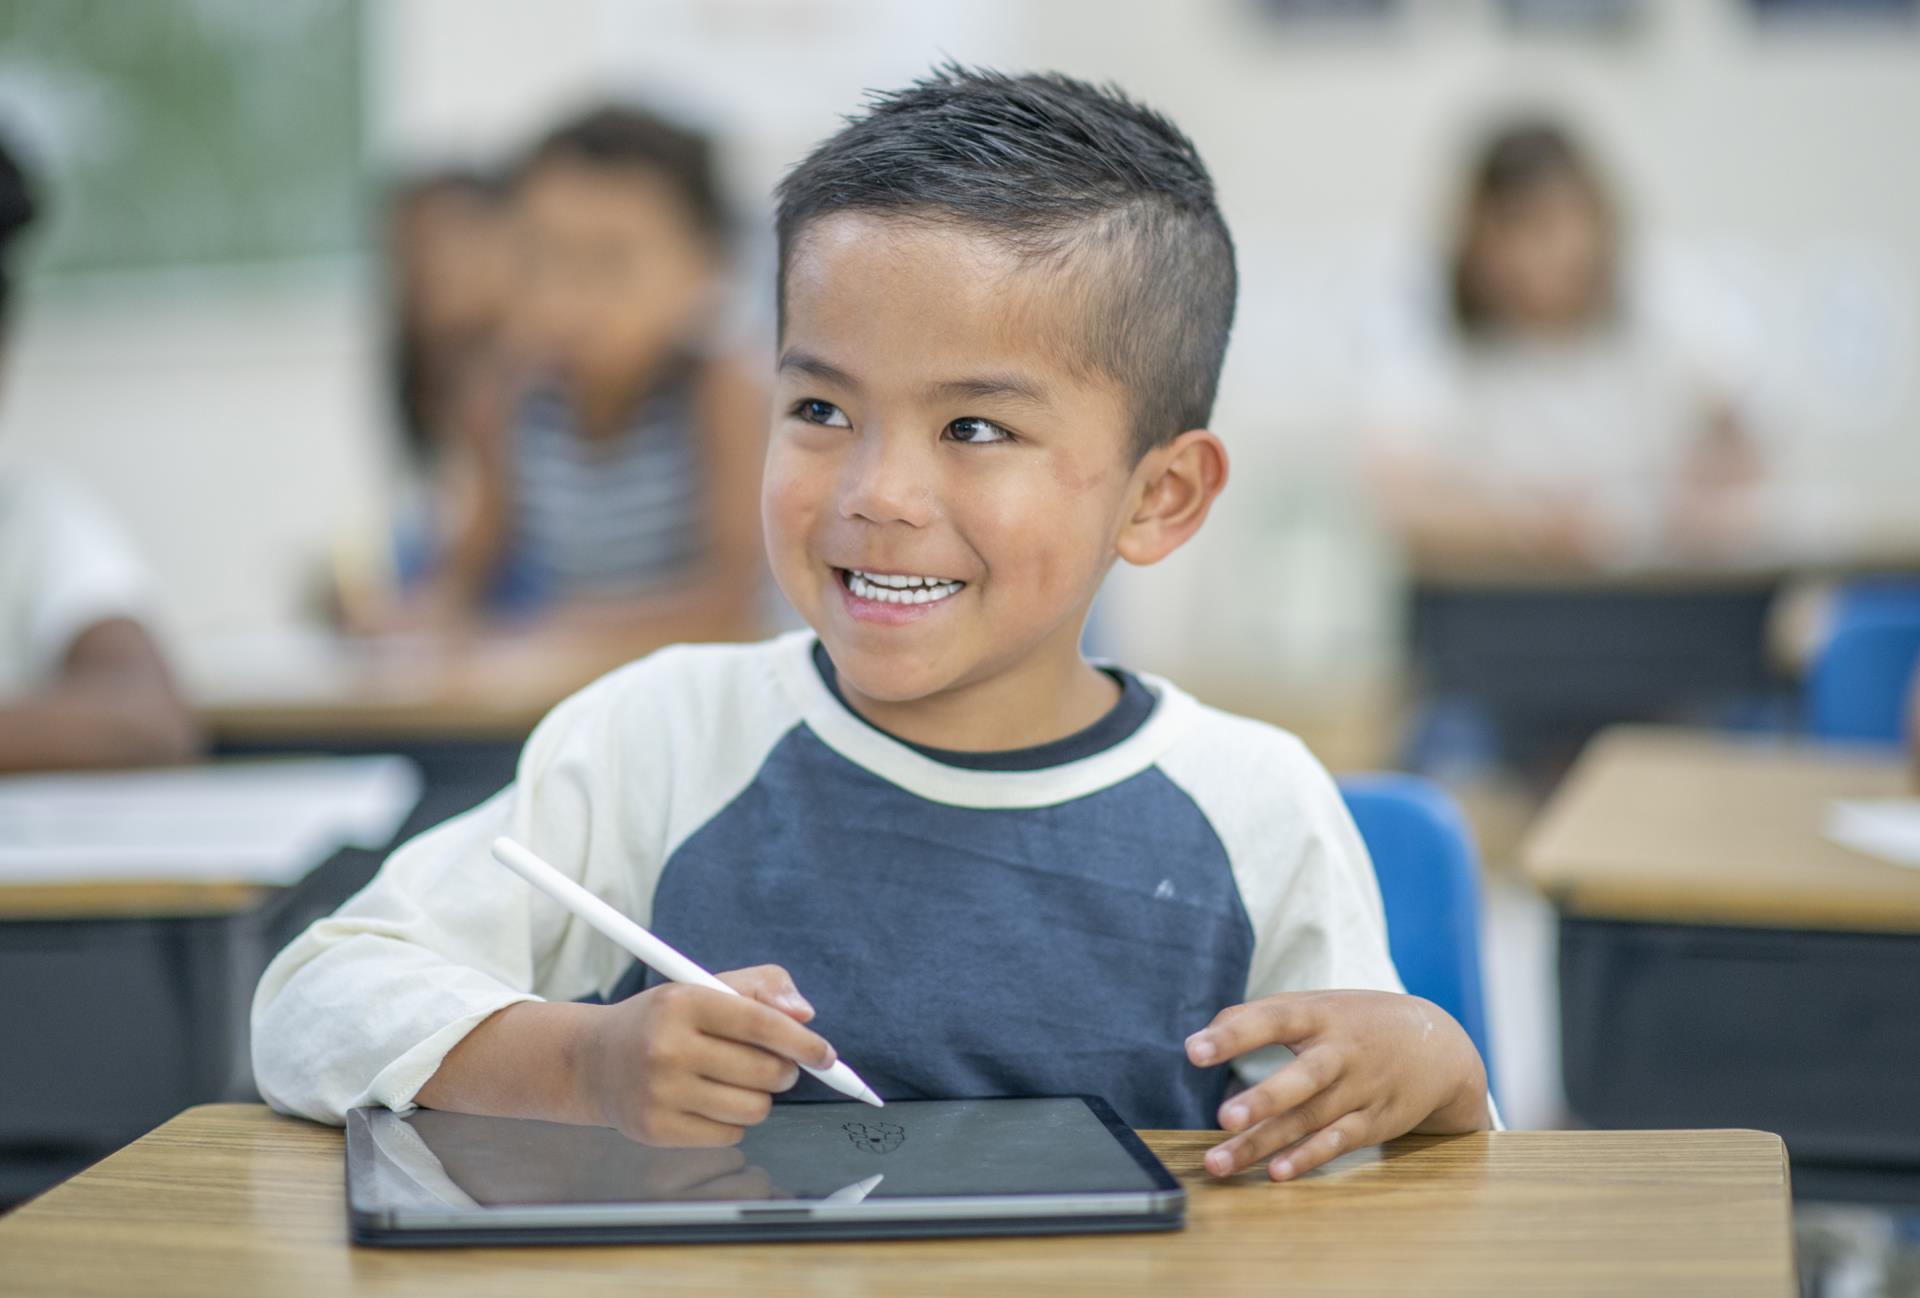 Smiling student using a tablet at their desk